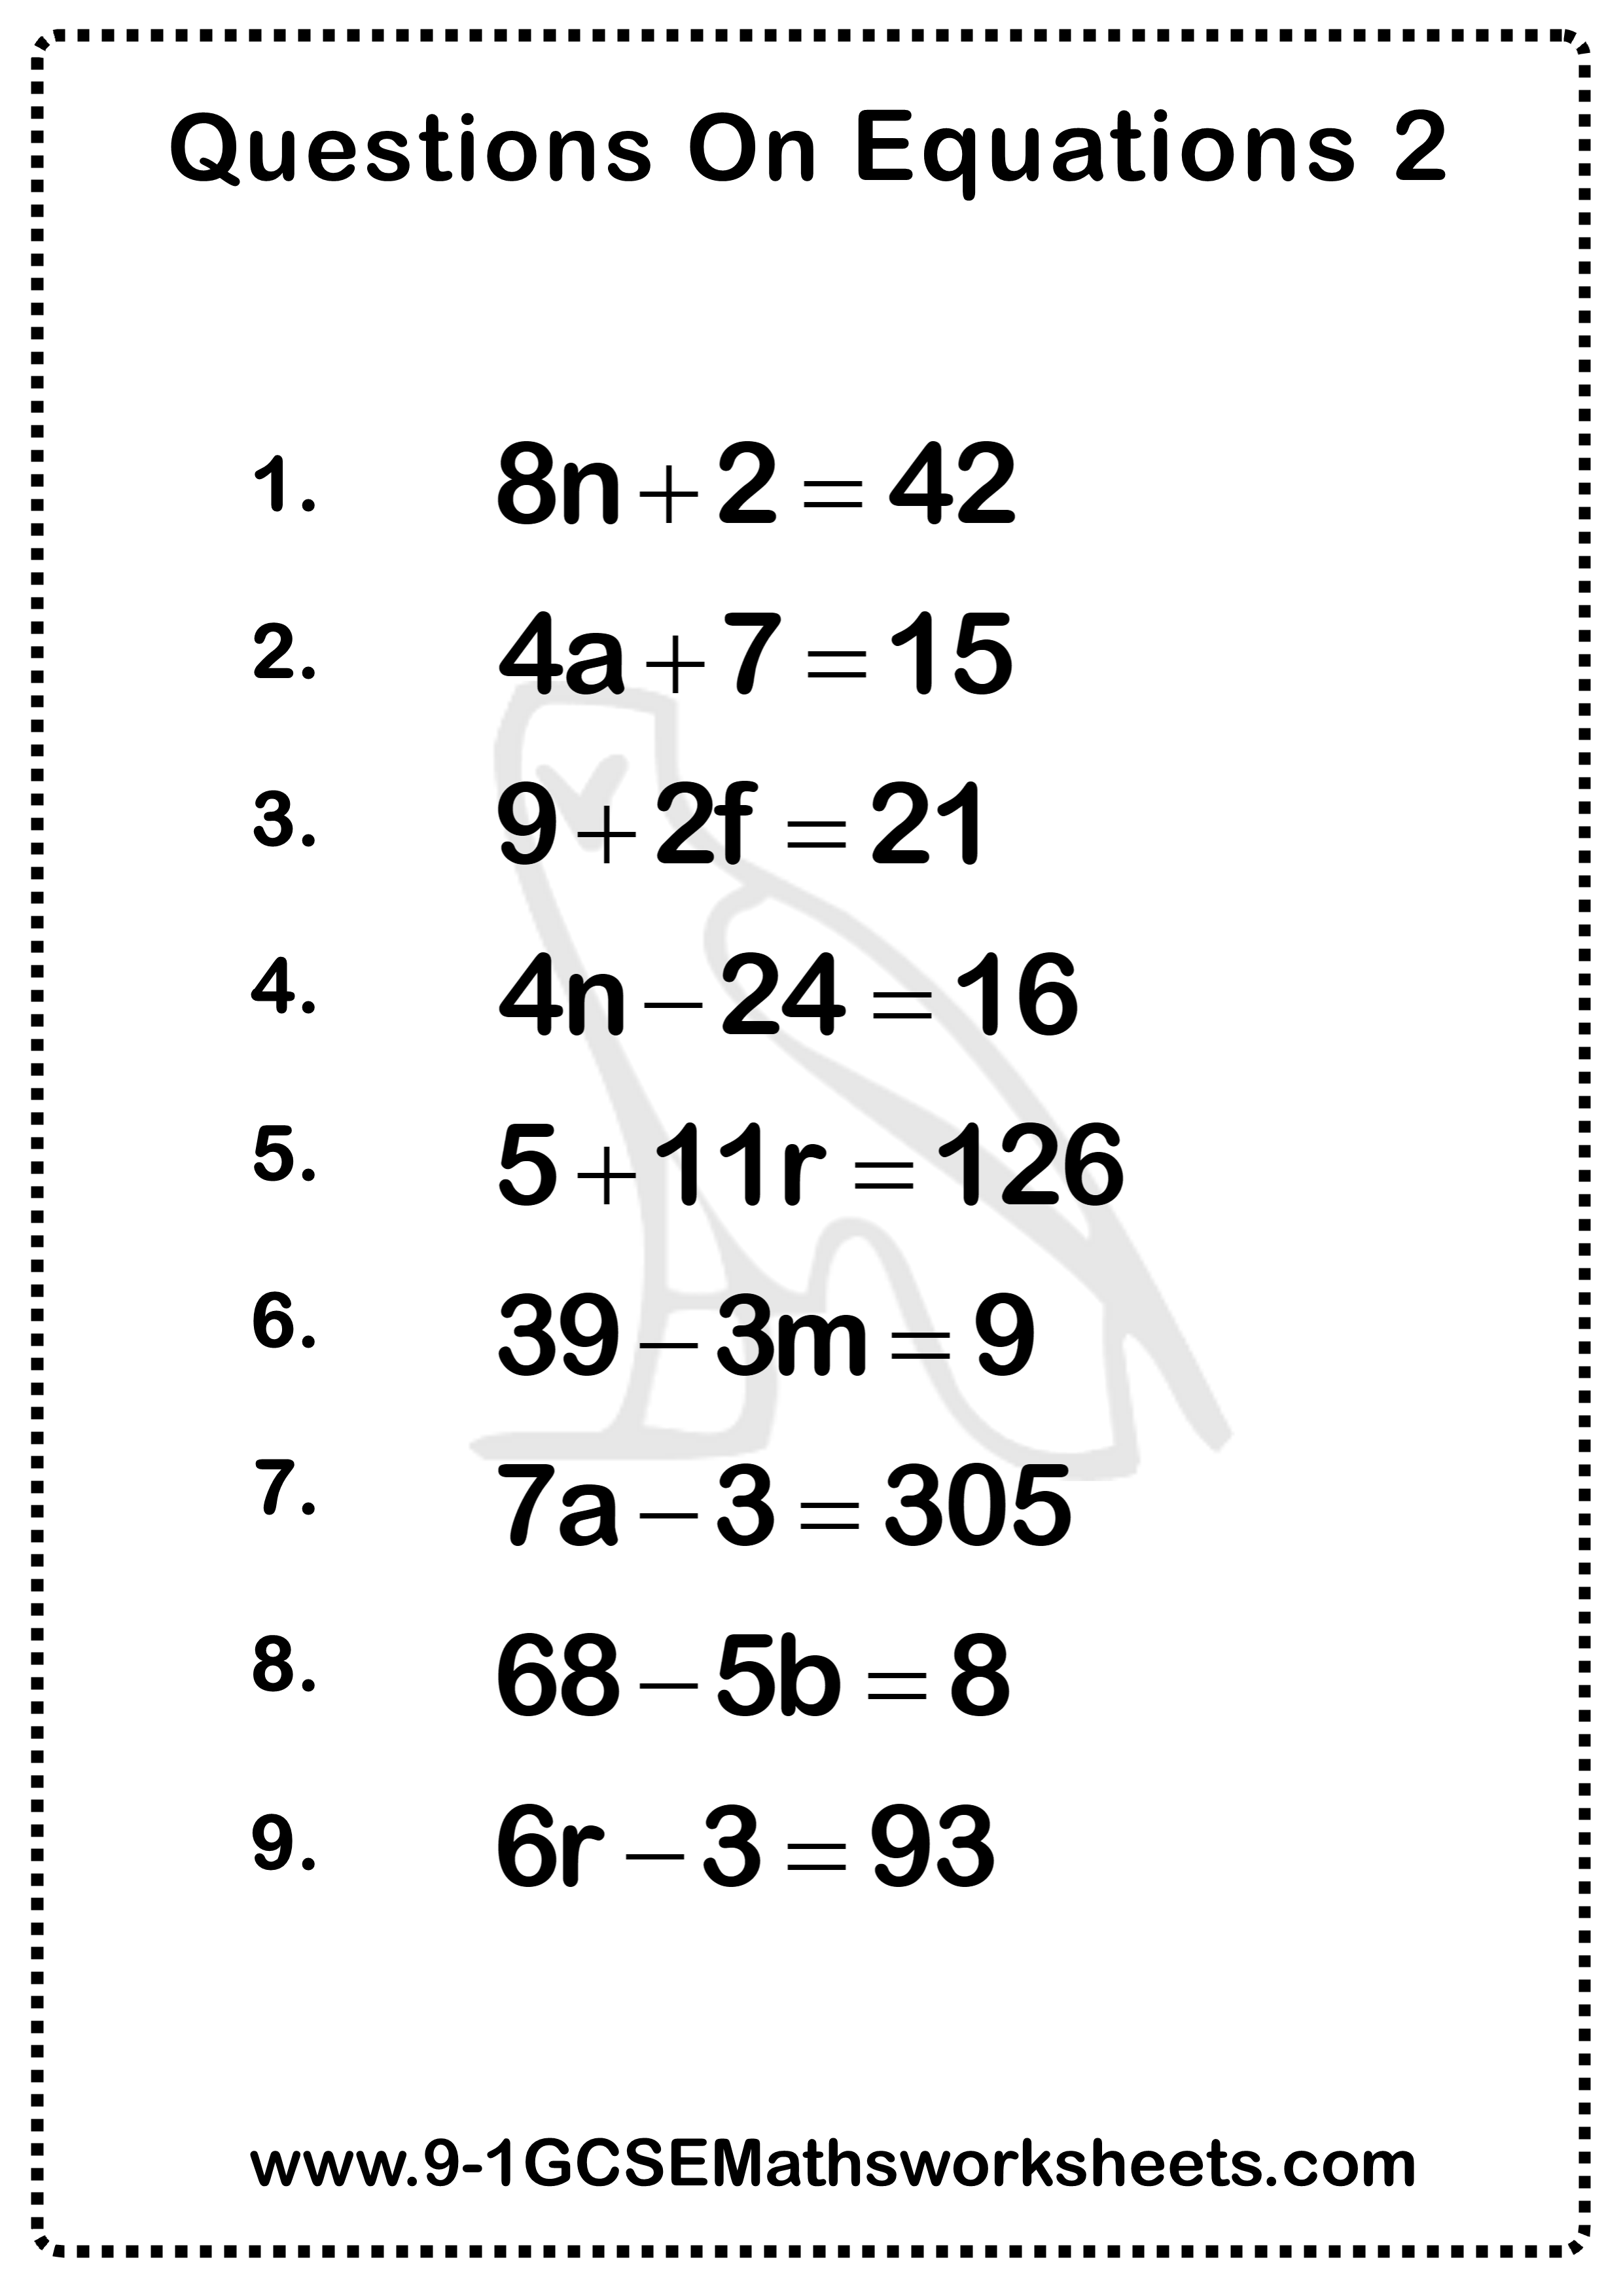 Equations Worksheet Practice Questions | Cazoomy